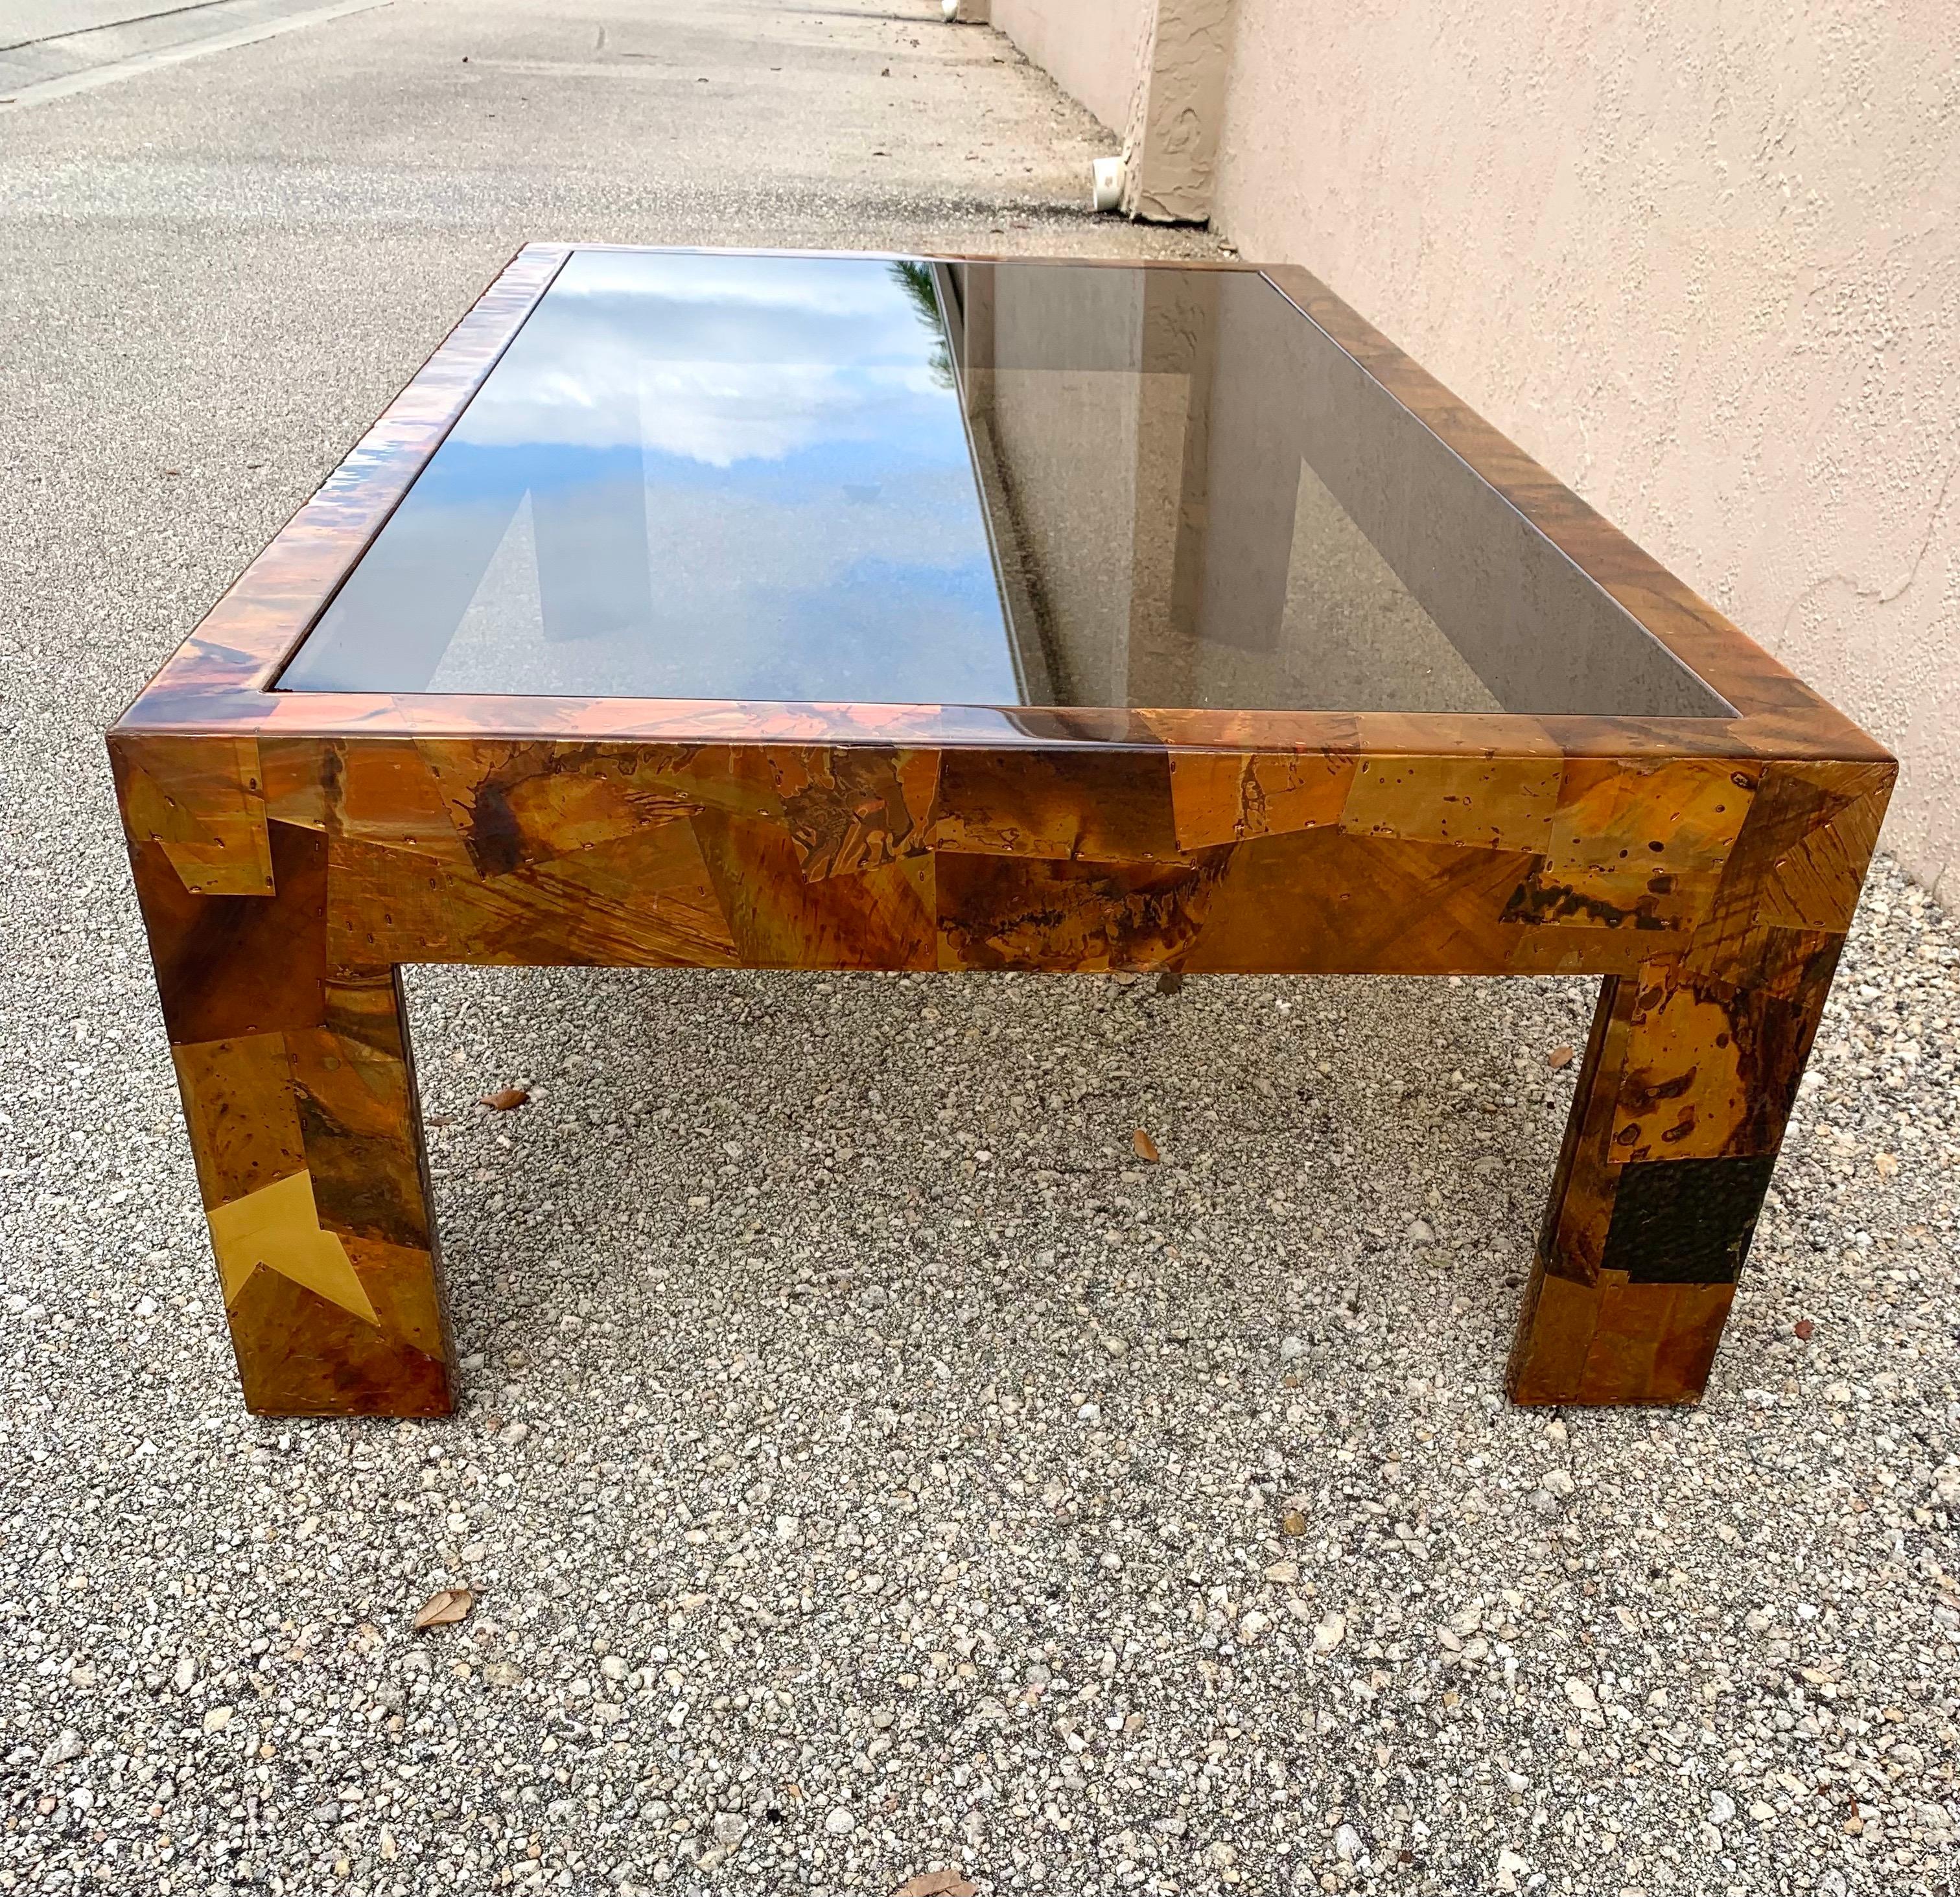 20th Century Mid-Century Modern Copper and Brass Coffee Table in the Style of Paul Evans For Sale